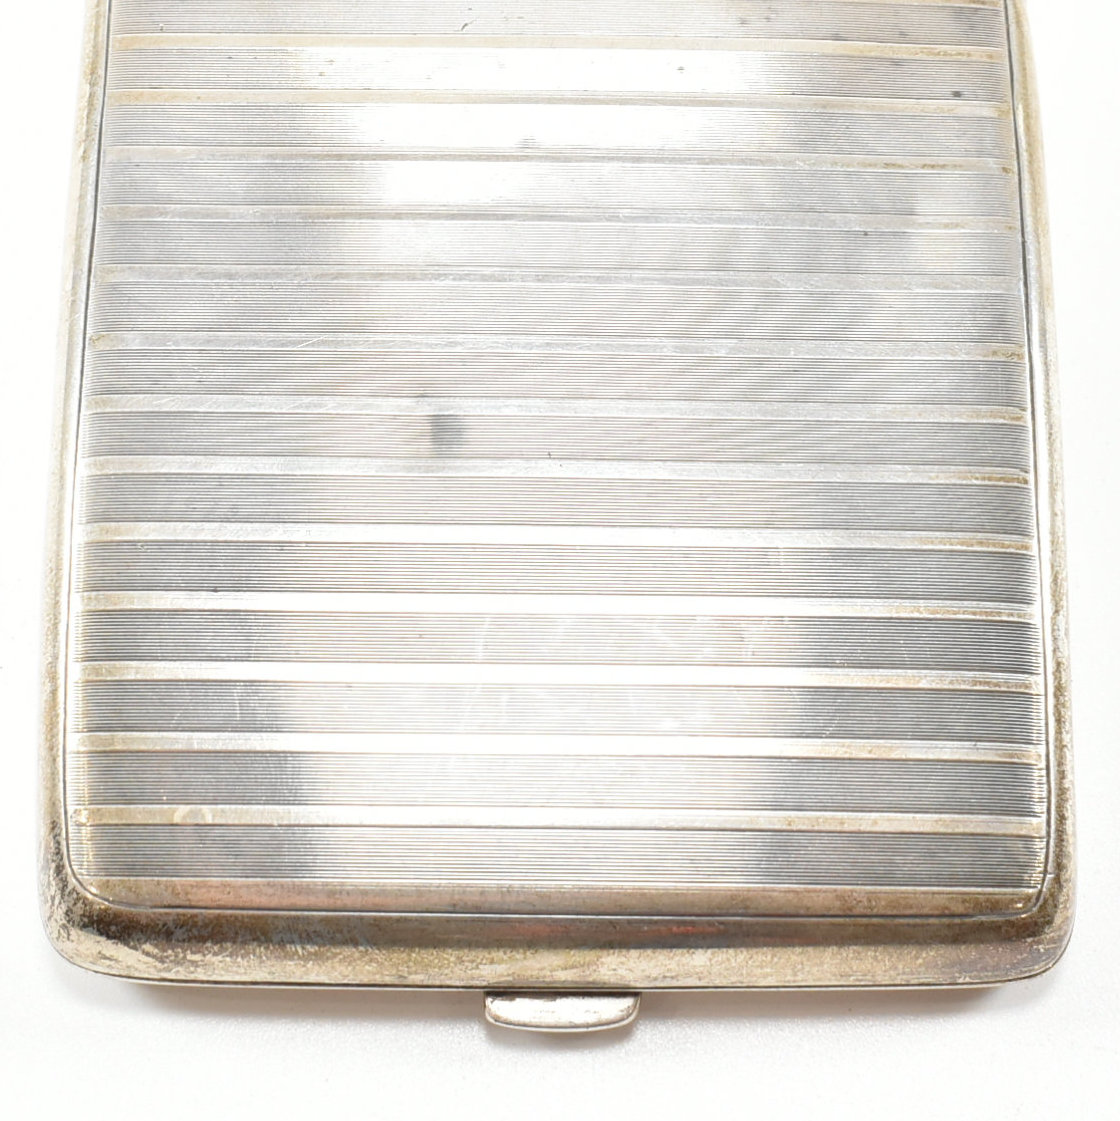 EARLY 20TH CENTURY HALLMARKED SILVER MAPPIN & WEBB CIGARETTE CASE - Image 8 of 8